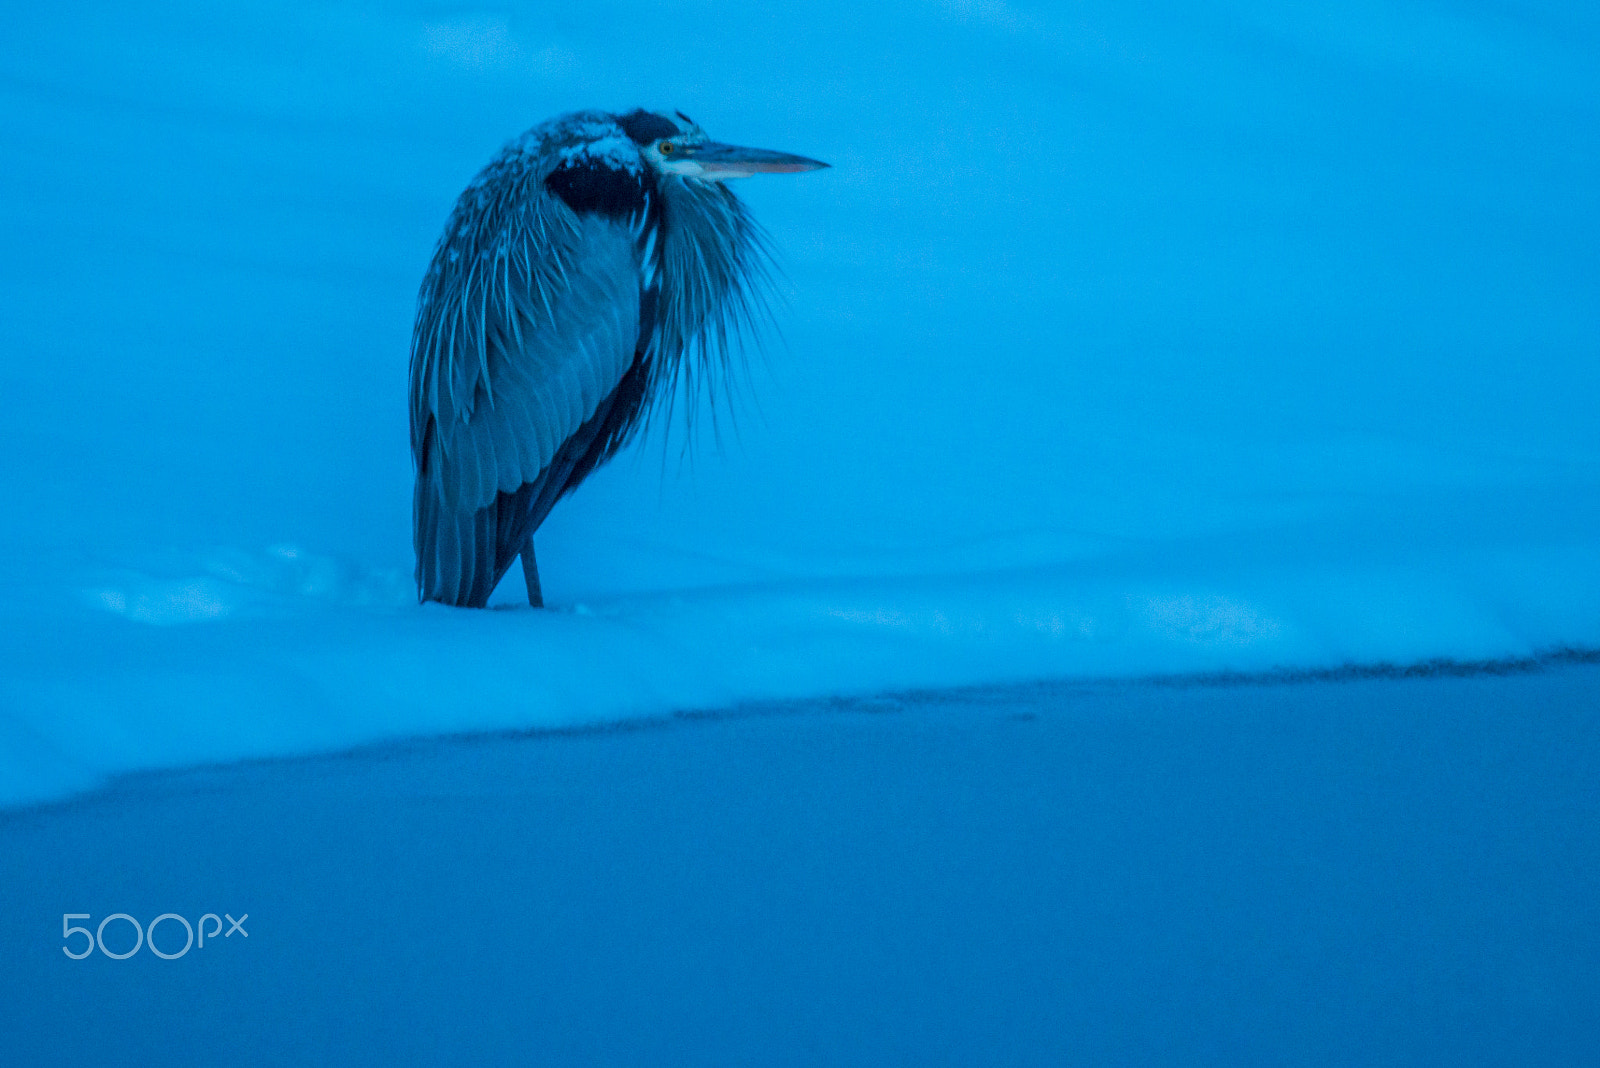 Nikon D800 + Sigma 150-600mm F5-6.3 DG OS HSM | S sample photo. Chilly heron photography